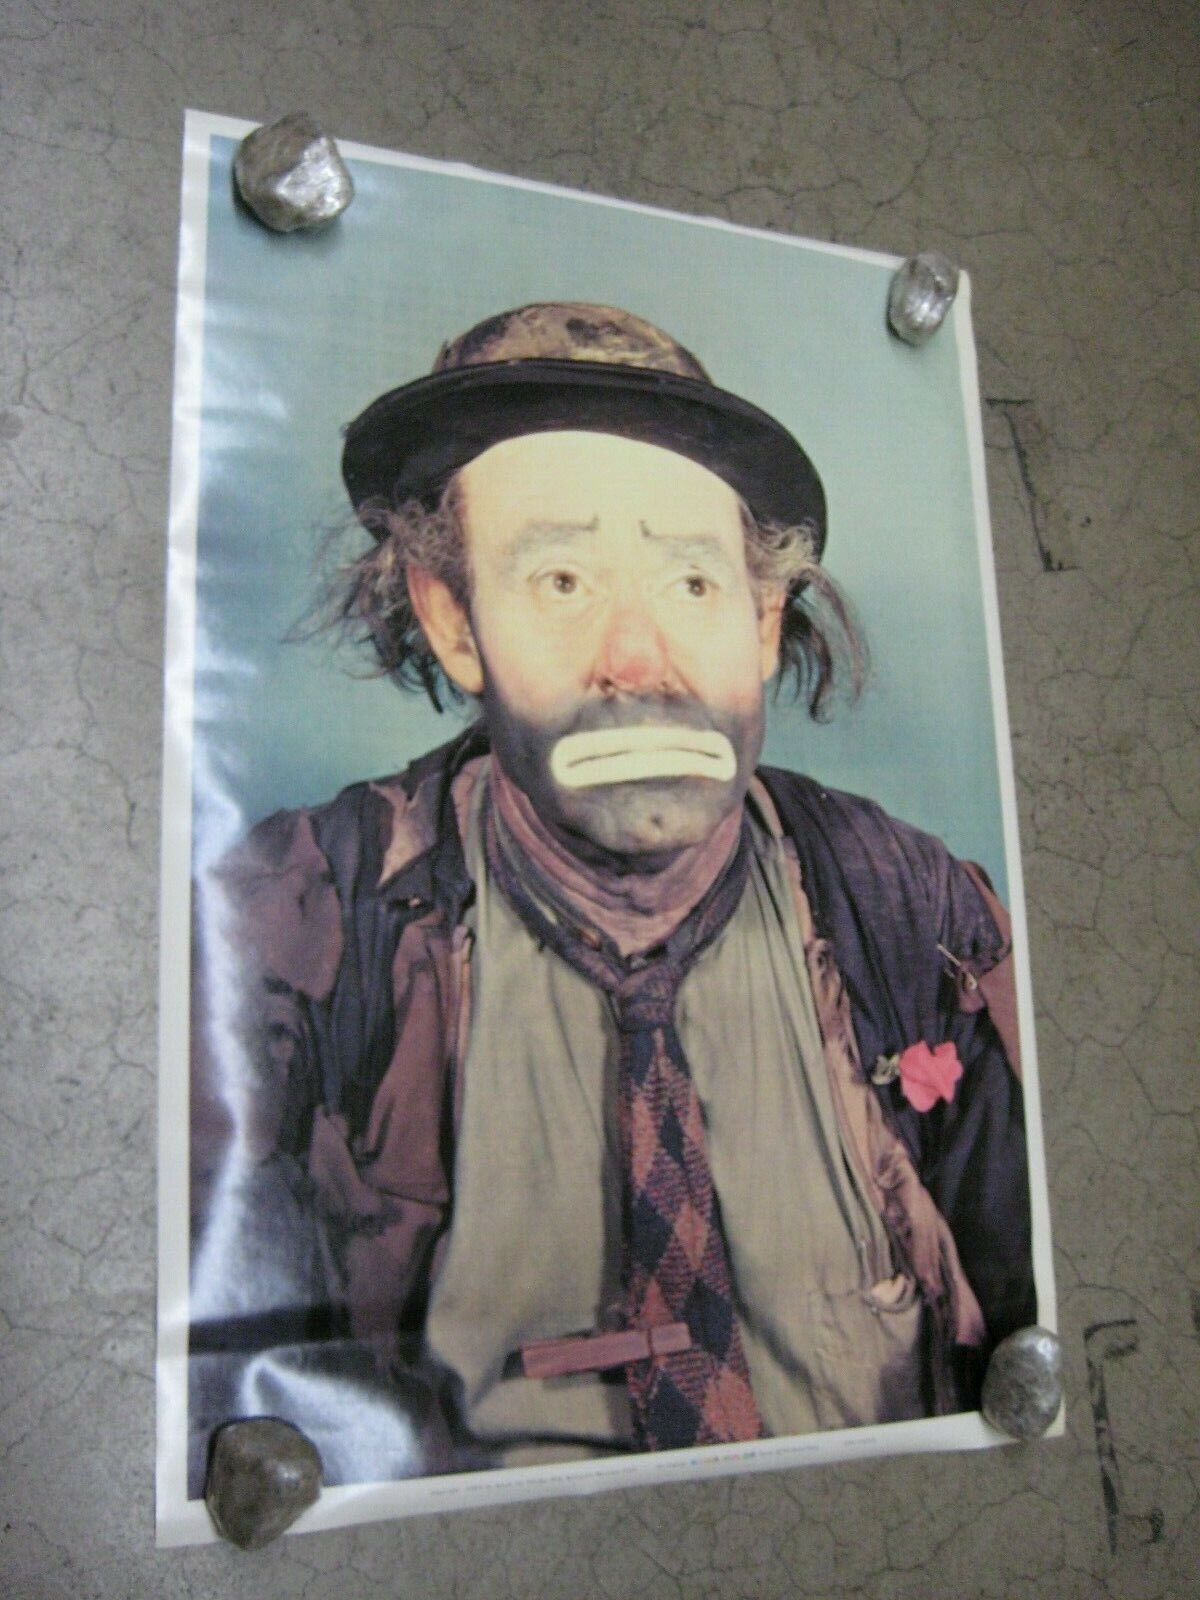 Weary Willie comedy entertainer Poster Vintage 1973 Koma-Kolor E